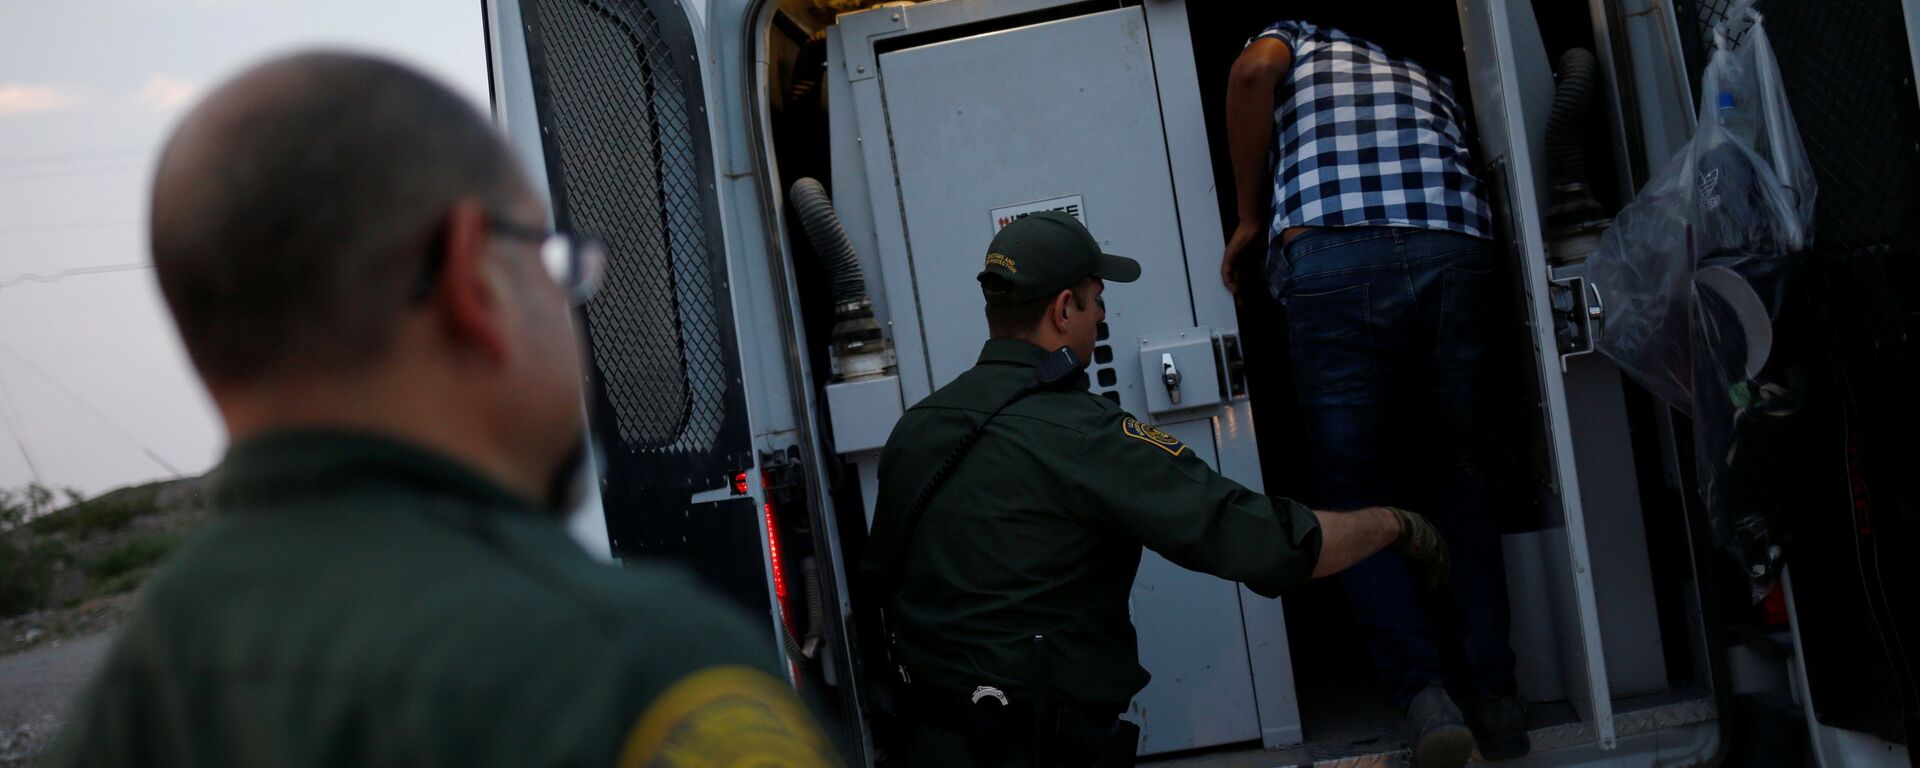 A migrant from Central America is detained by U.S. Border Patrol agents after crossing into the United States from Mexico, in Sunland Park, New Mexico, U.S., July 22, 2021 - Sputnik International, 1920, 28.10.2021